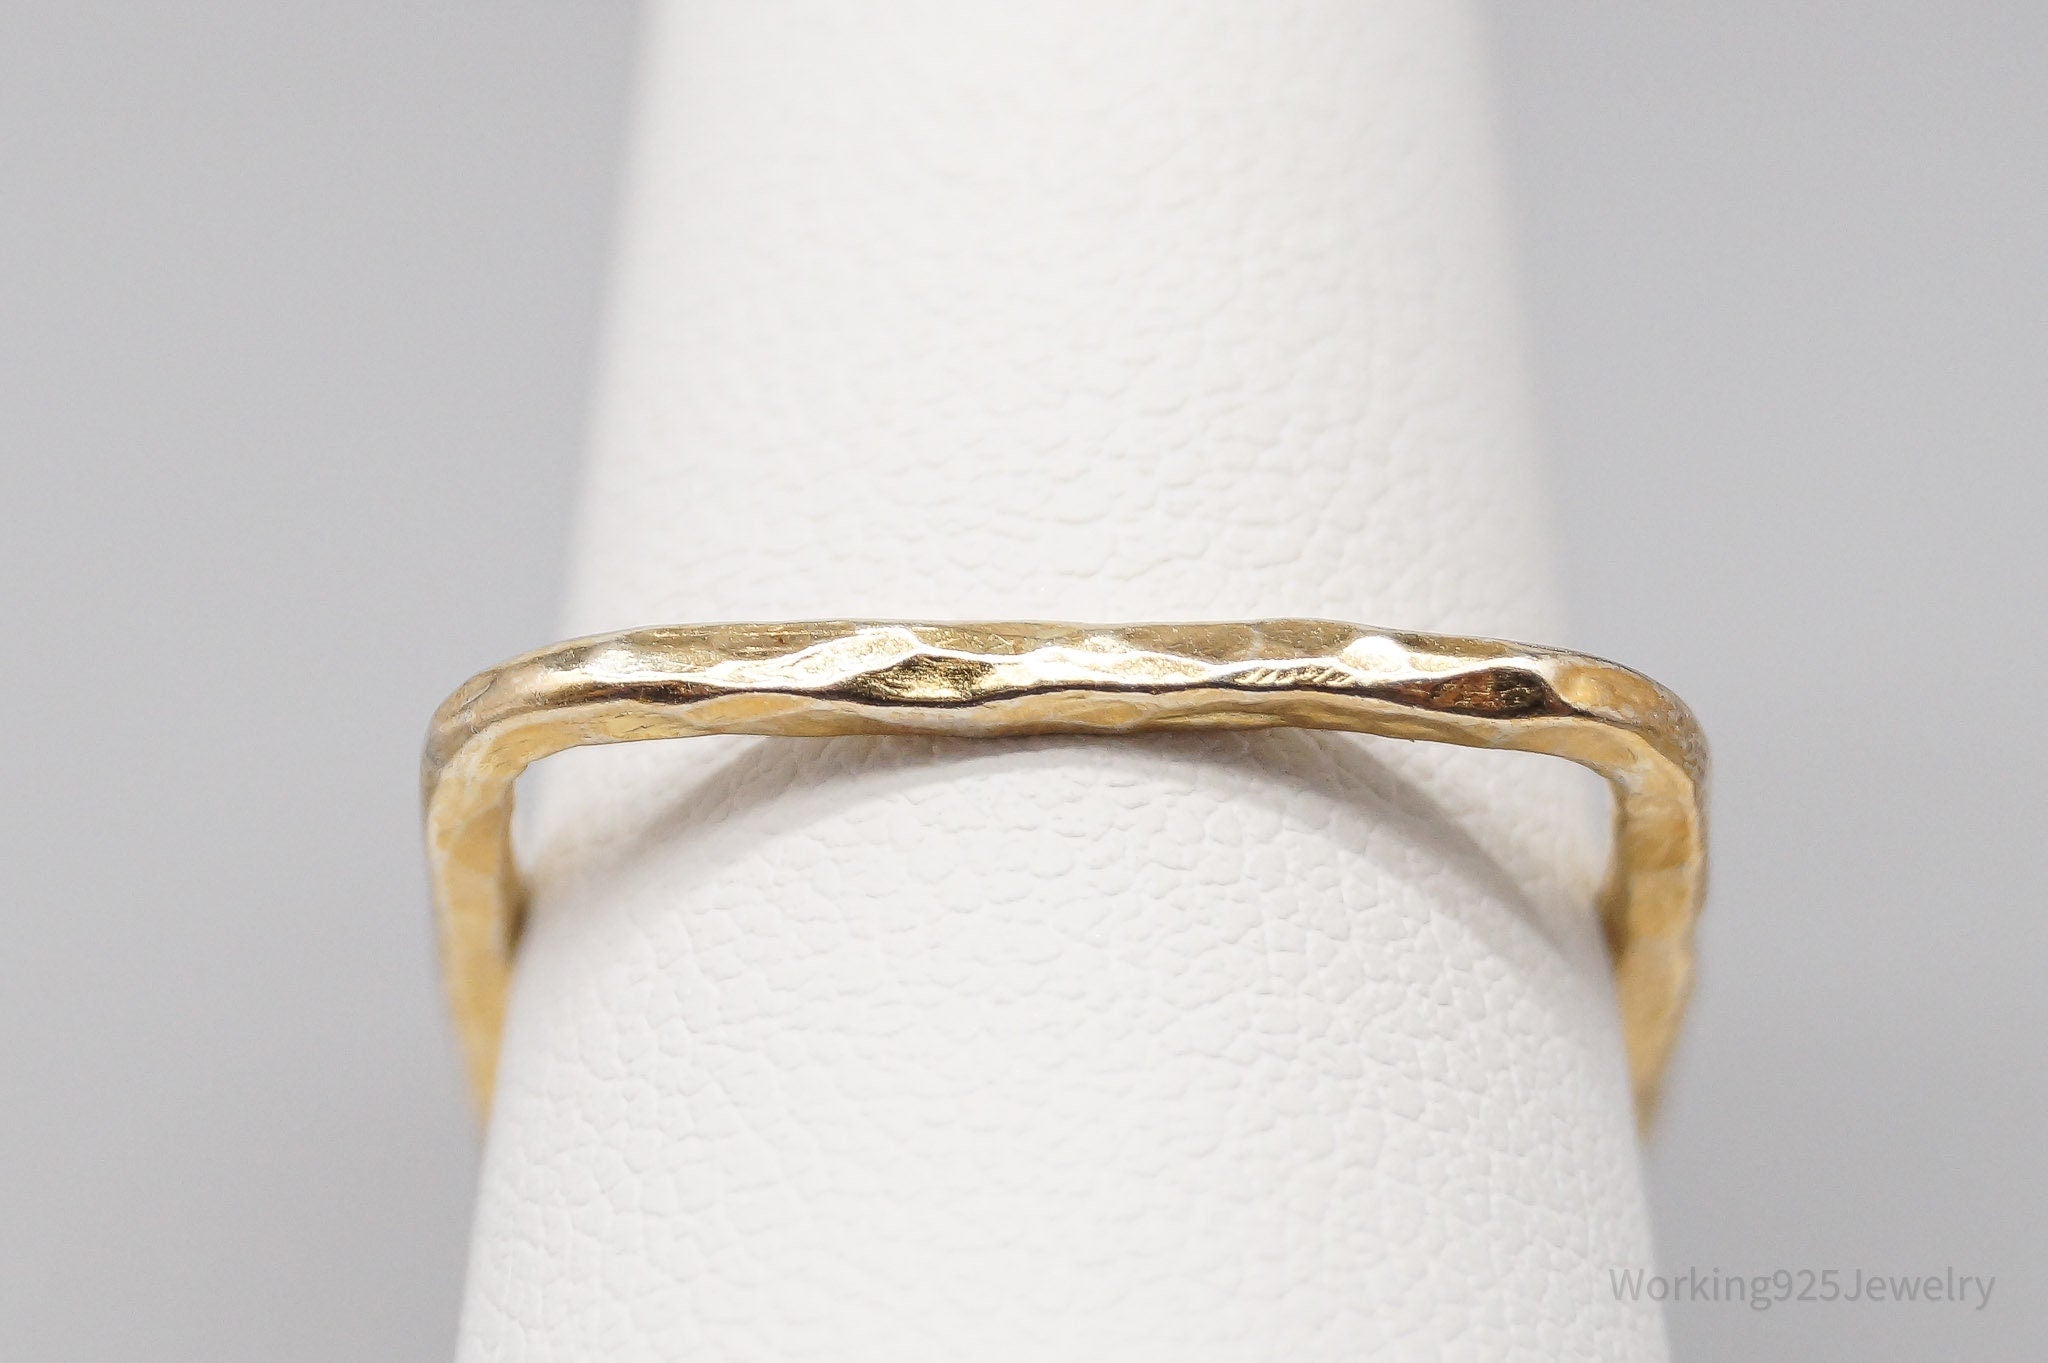 Vintage Hammered Style Gold Vermeil Sterling Silver Square Ring - Size 7.75